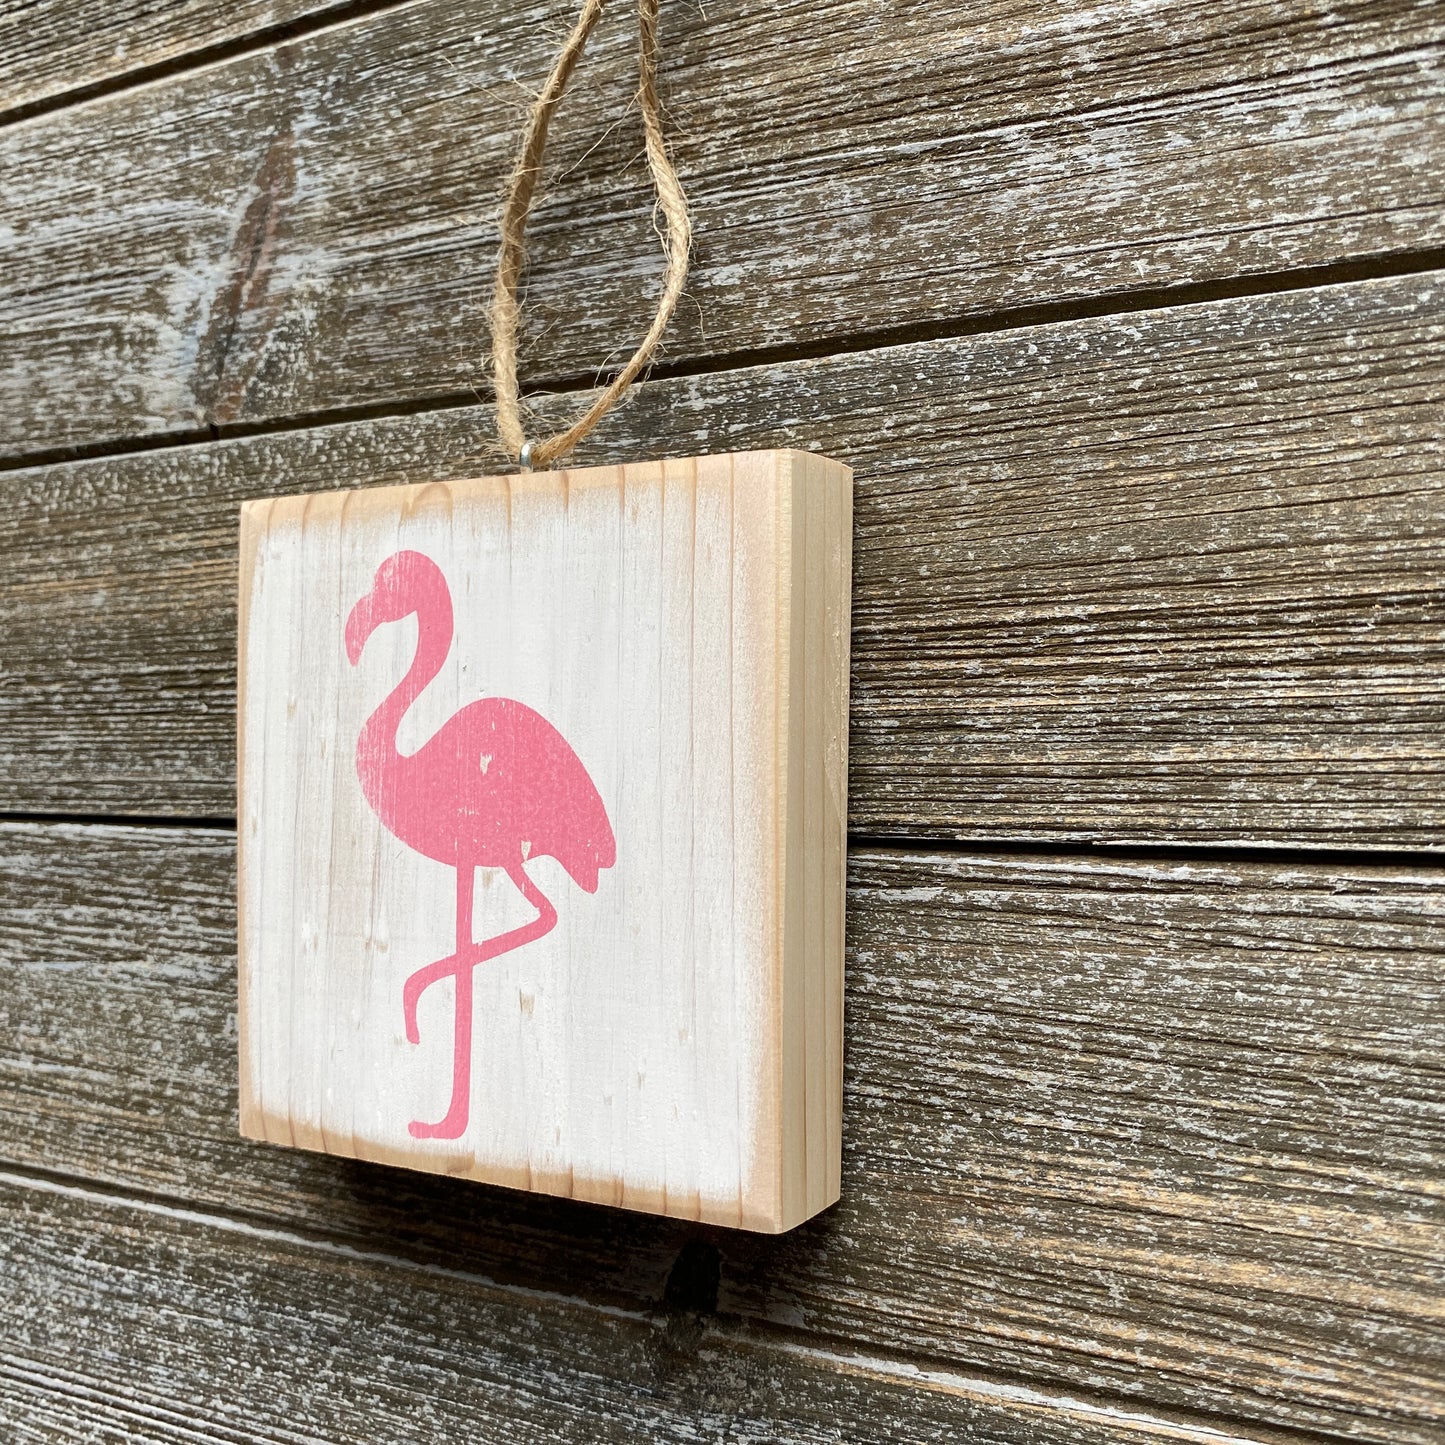 Summer Decor - Pink and White Flamingo Ornament